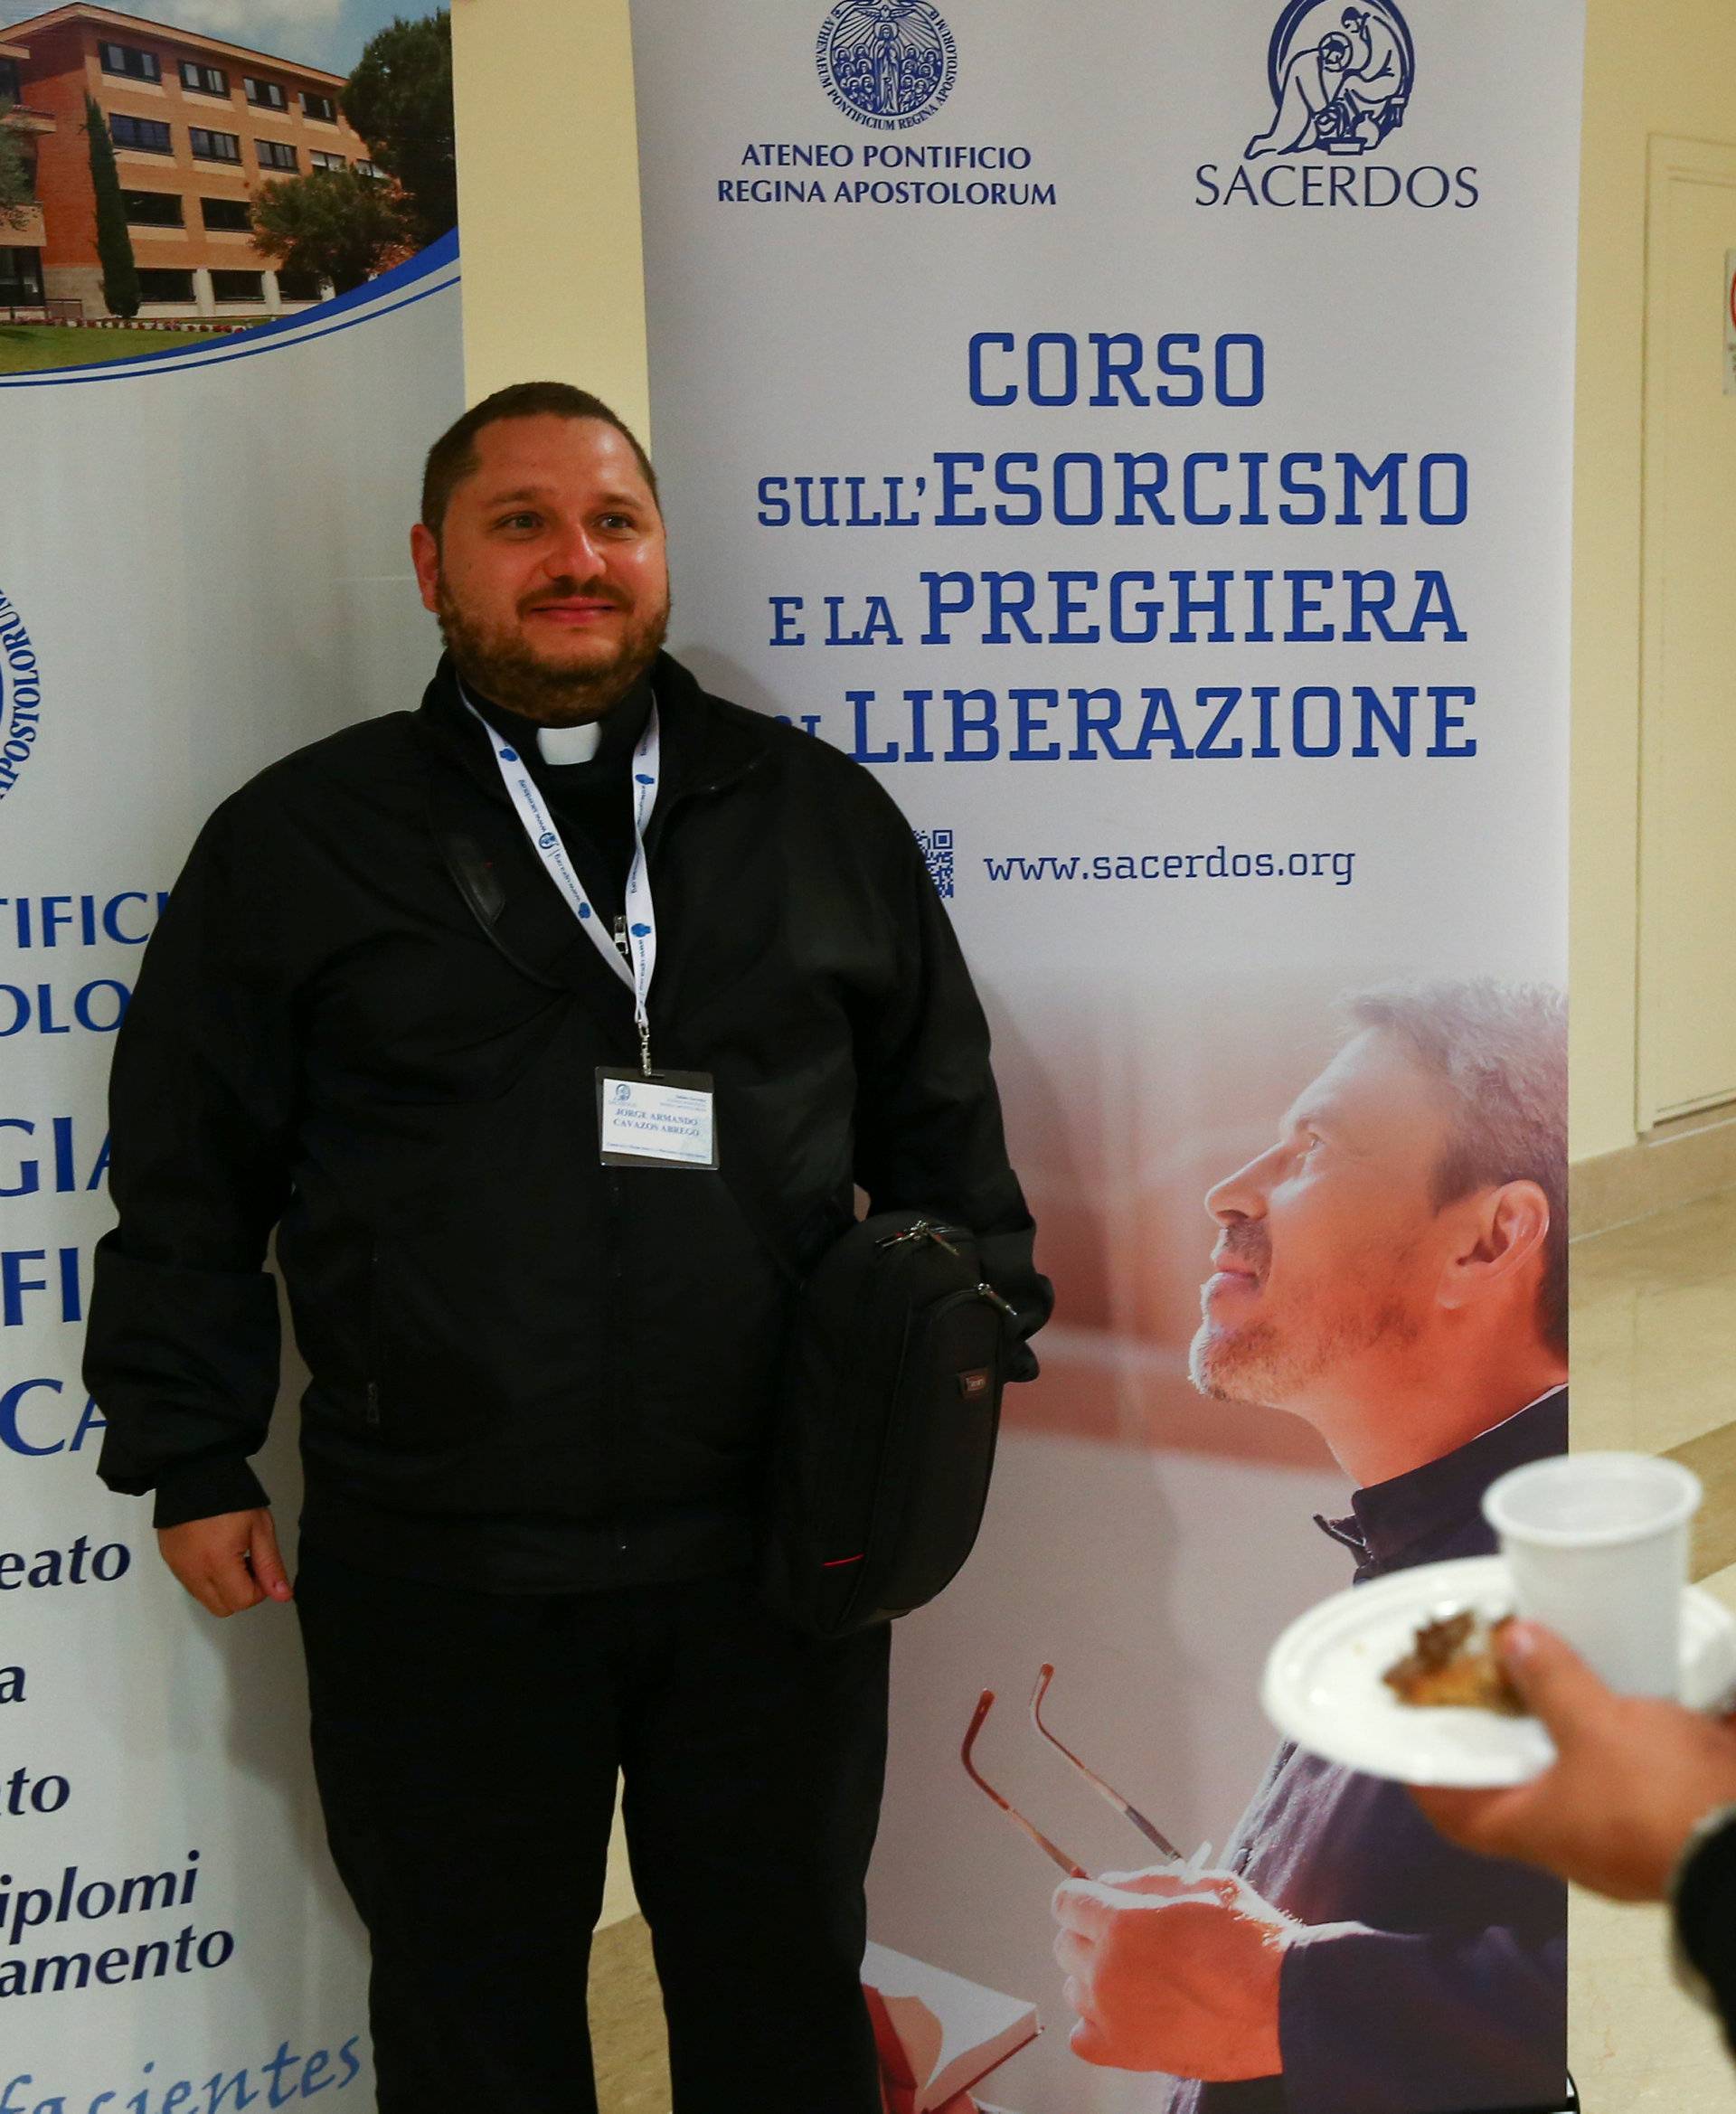 A priest poses for a picture next to a banner advertising a course for aspiring exorcists in Rome